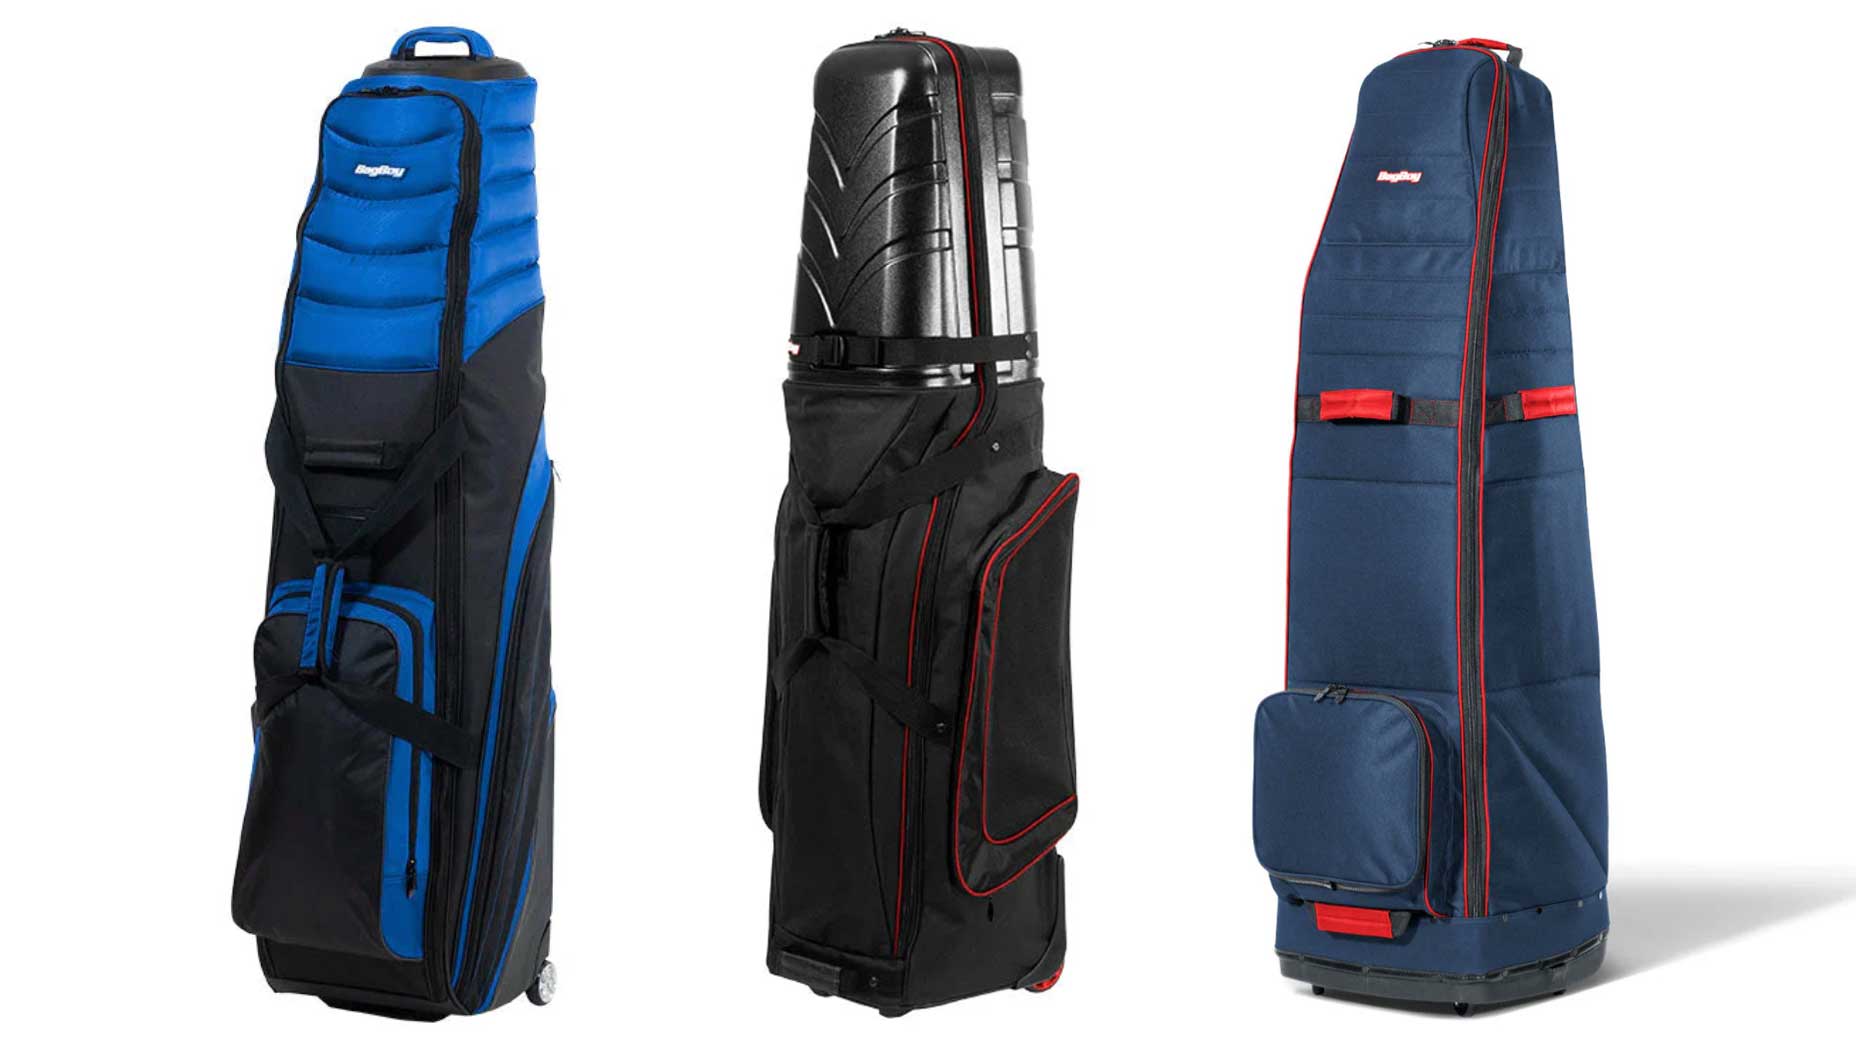 three travel bags for your golf clubs